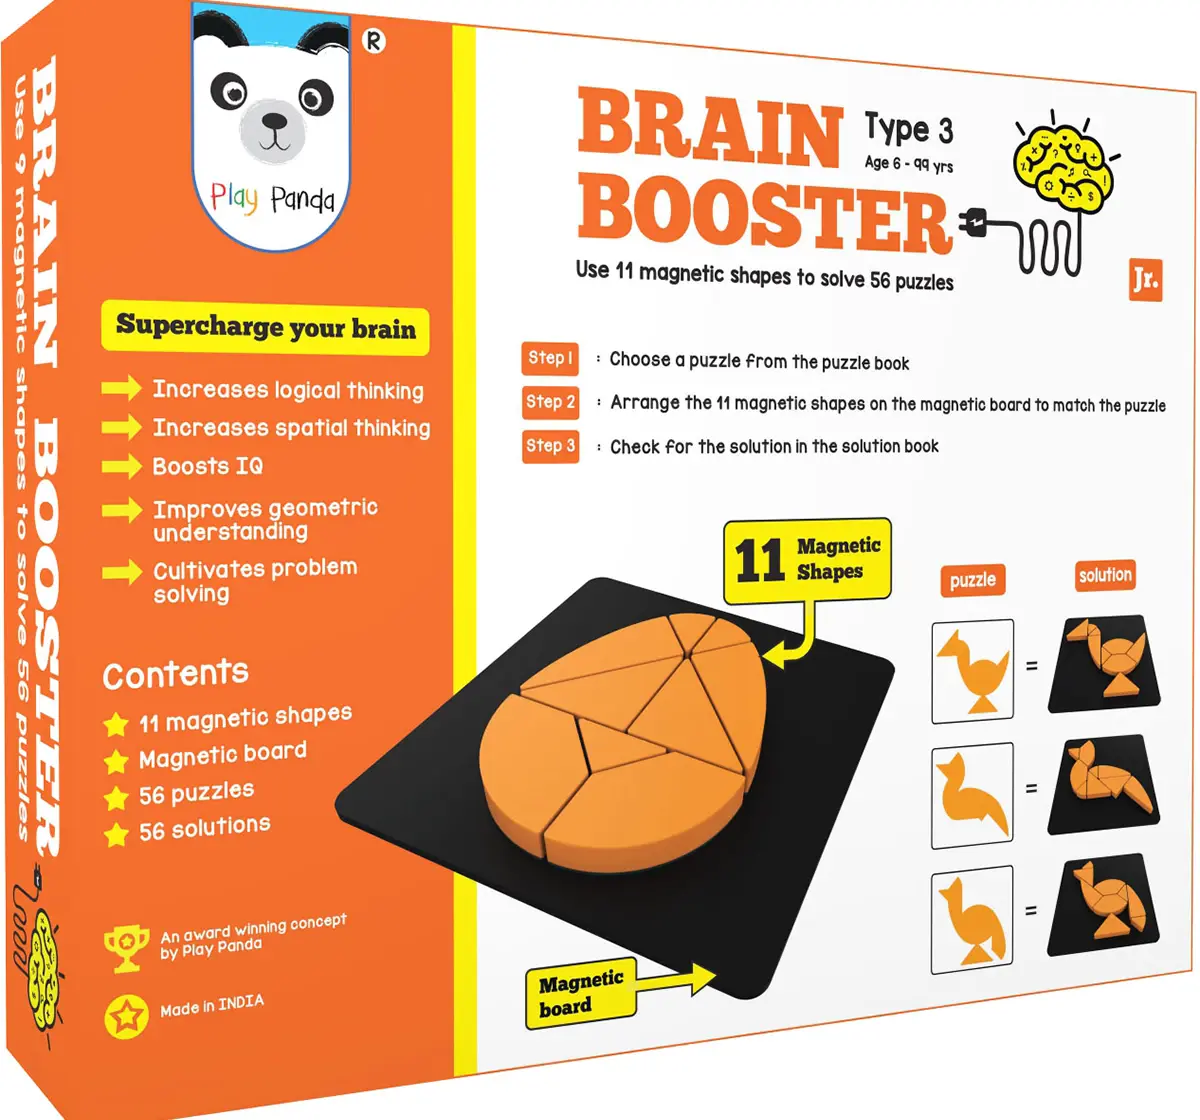 Play Panda Brain Booster Set 3 (Junior) - 56 Puzzles Designed To Boost Intelligence - With Magnetic Shapes, Magnetic Board, Puzzle Book And Solution Book Puzzles for Kids Age 6Y+